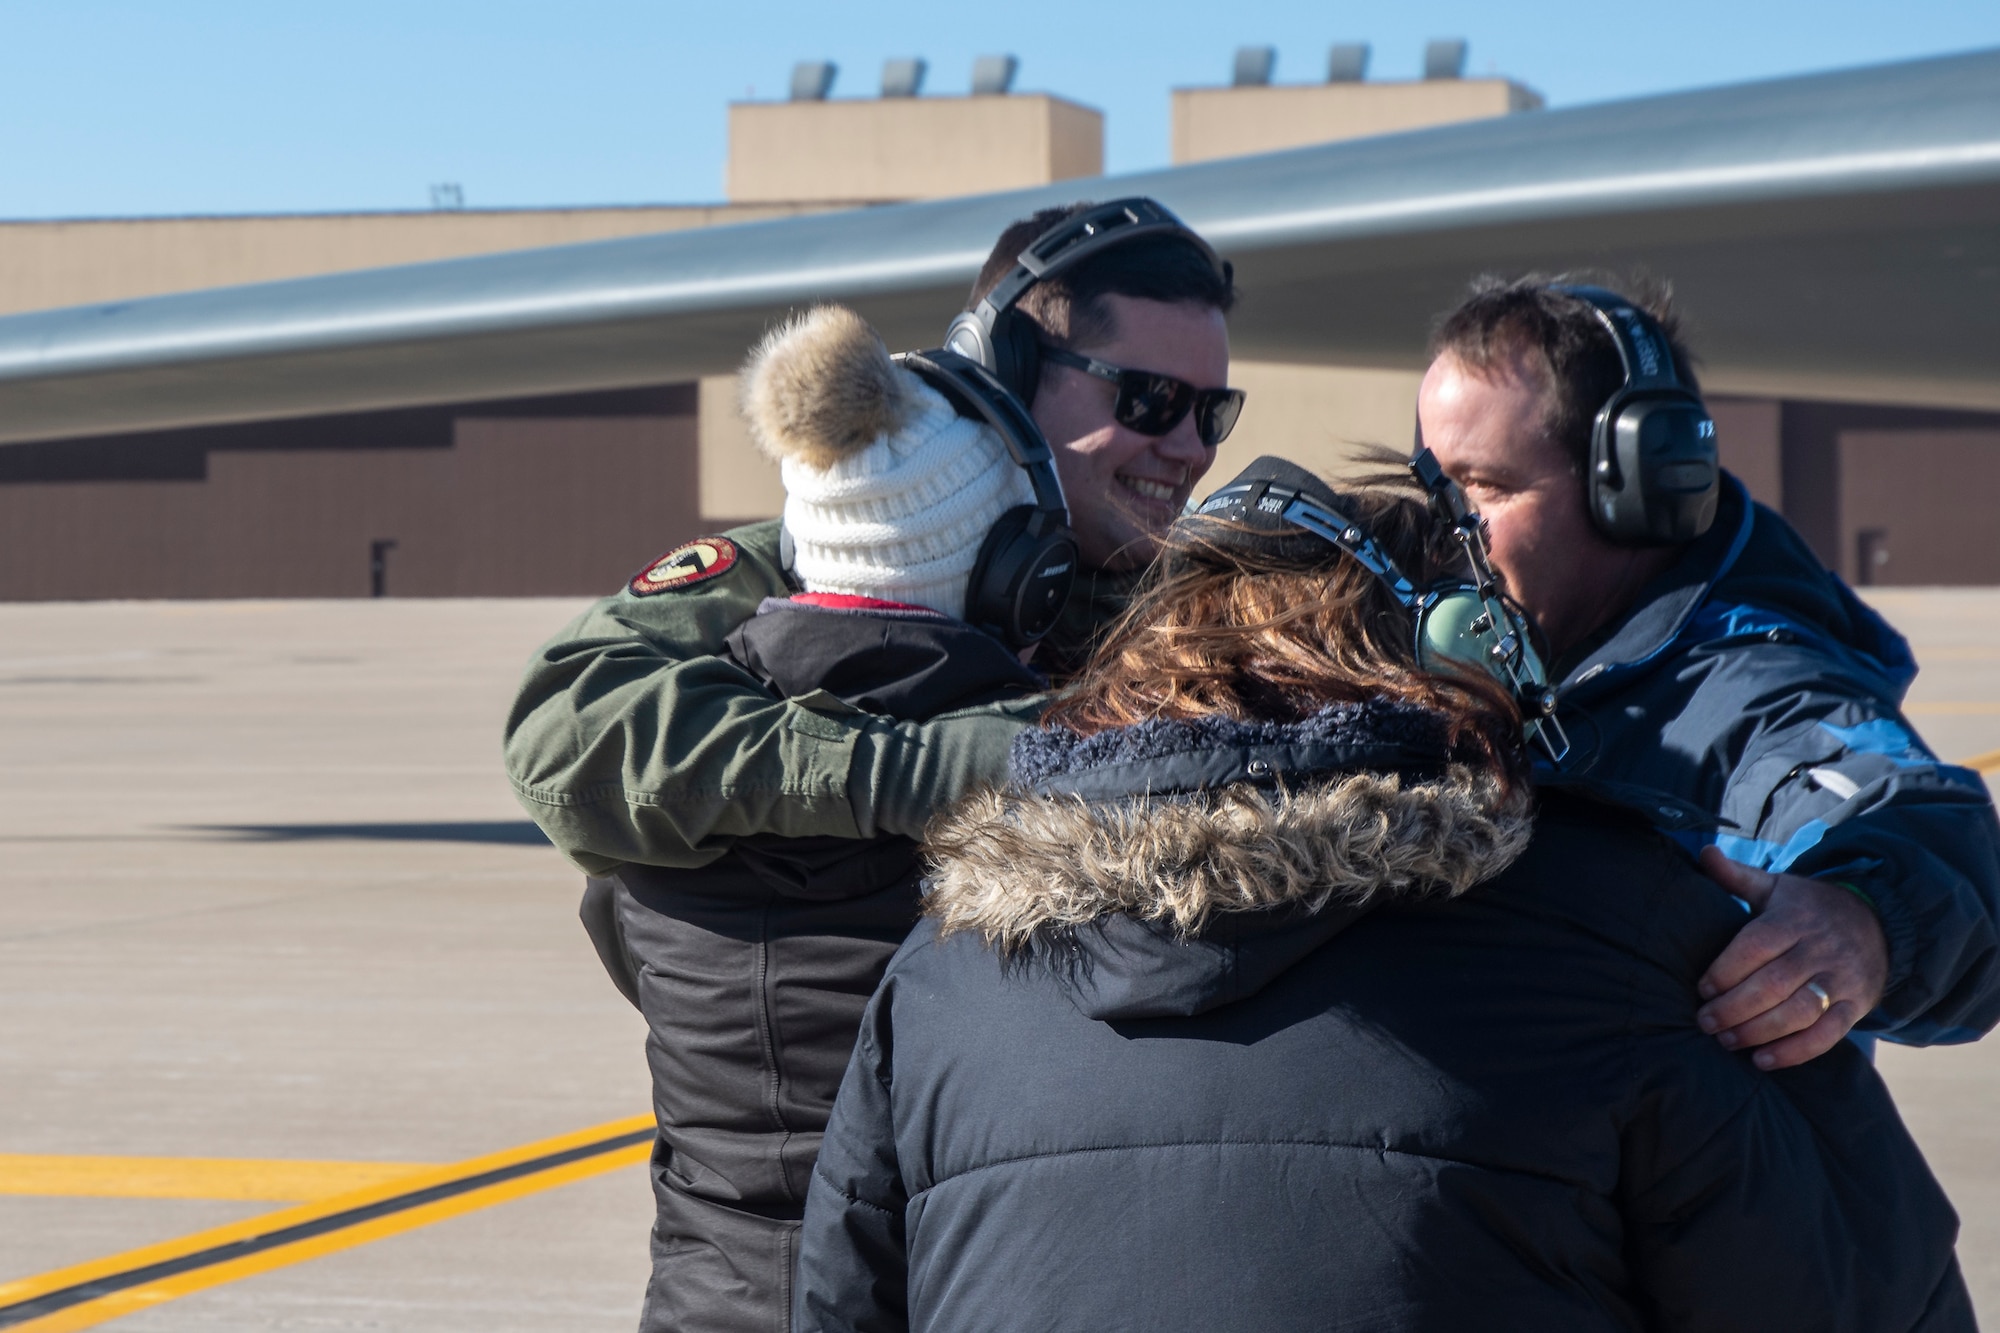 Master Sgt. Joshua Upton embraces friends and family following an incentive flight in a B-2 Spirit stealth bomber at Whiteman Air Force Base, Missouri, Jan. 9, 2022. Upton, the wing's Maintainer of the Year, earned his ride in the aircraft due to his exemplary work throughout 2021. (U.S. Air National Guard photo, 131st Bomb Wing Public Affairs)